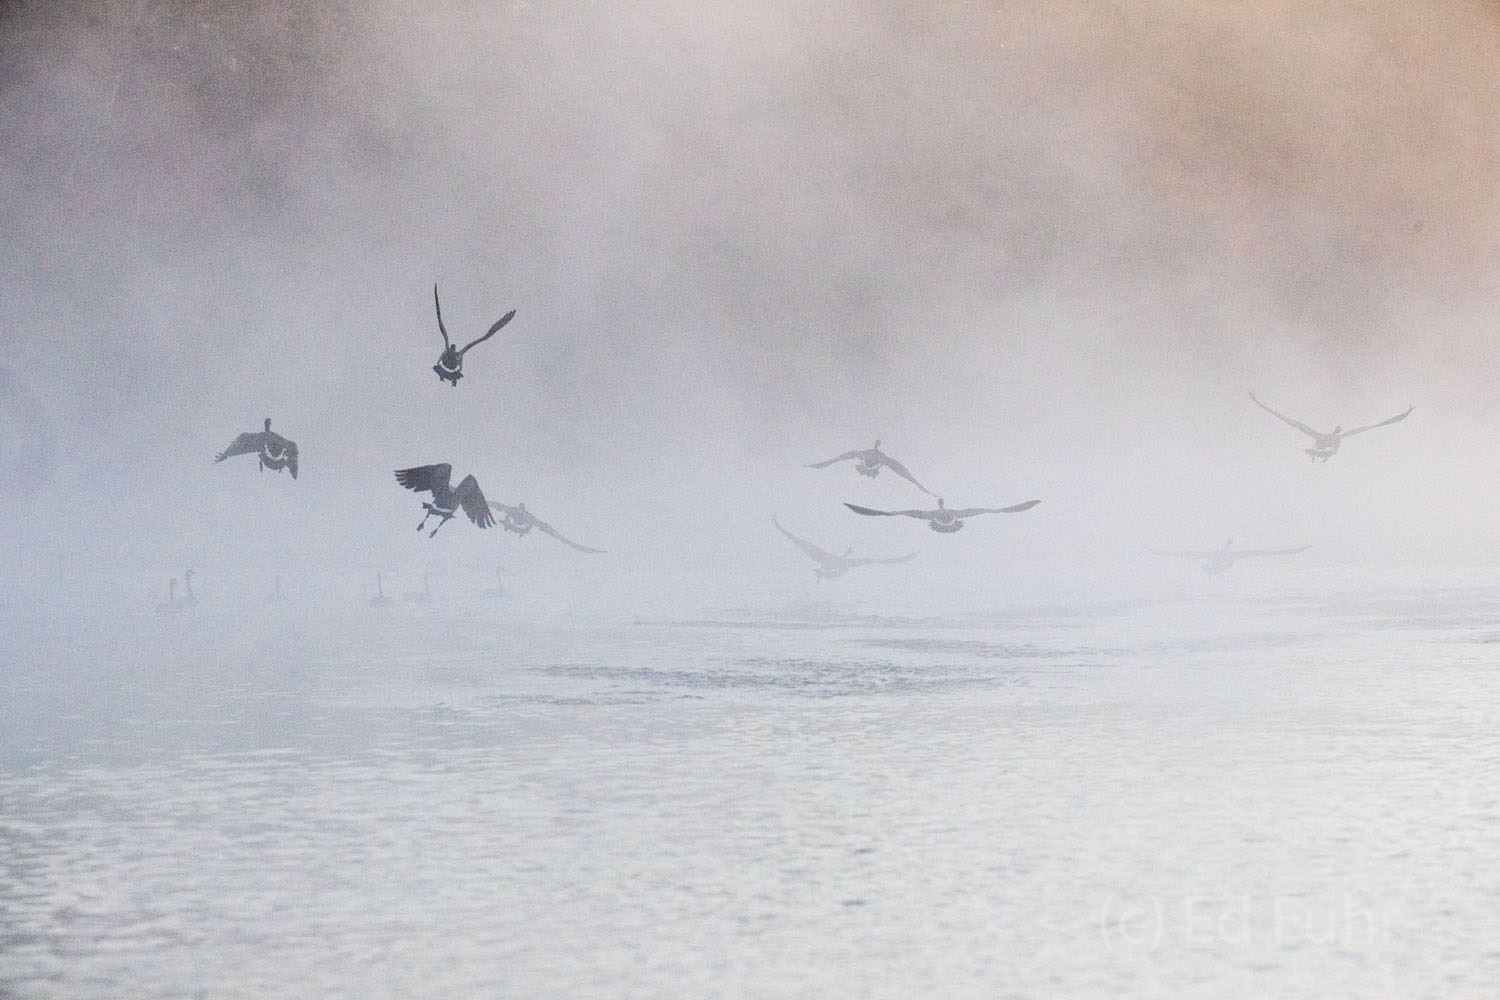 Canadaian geese and ducks blast off in the morning fog on the James RIver.